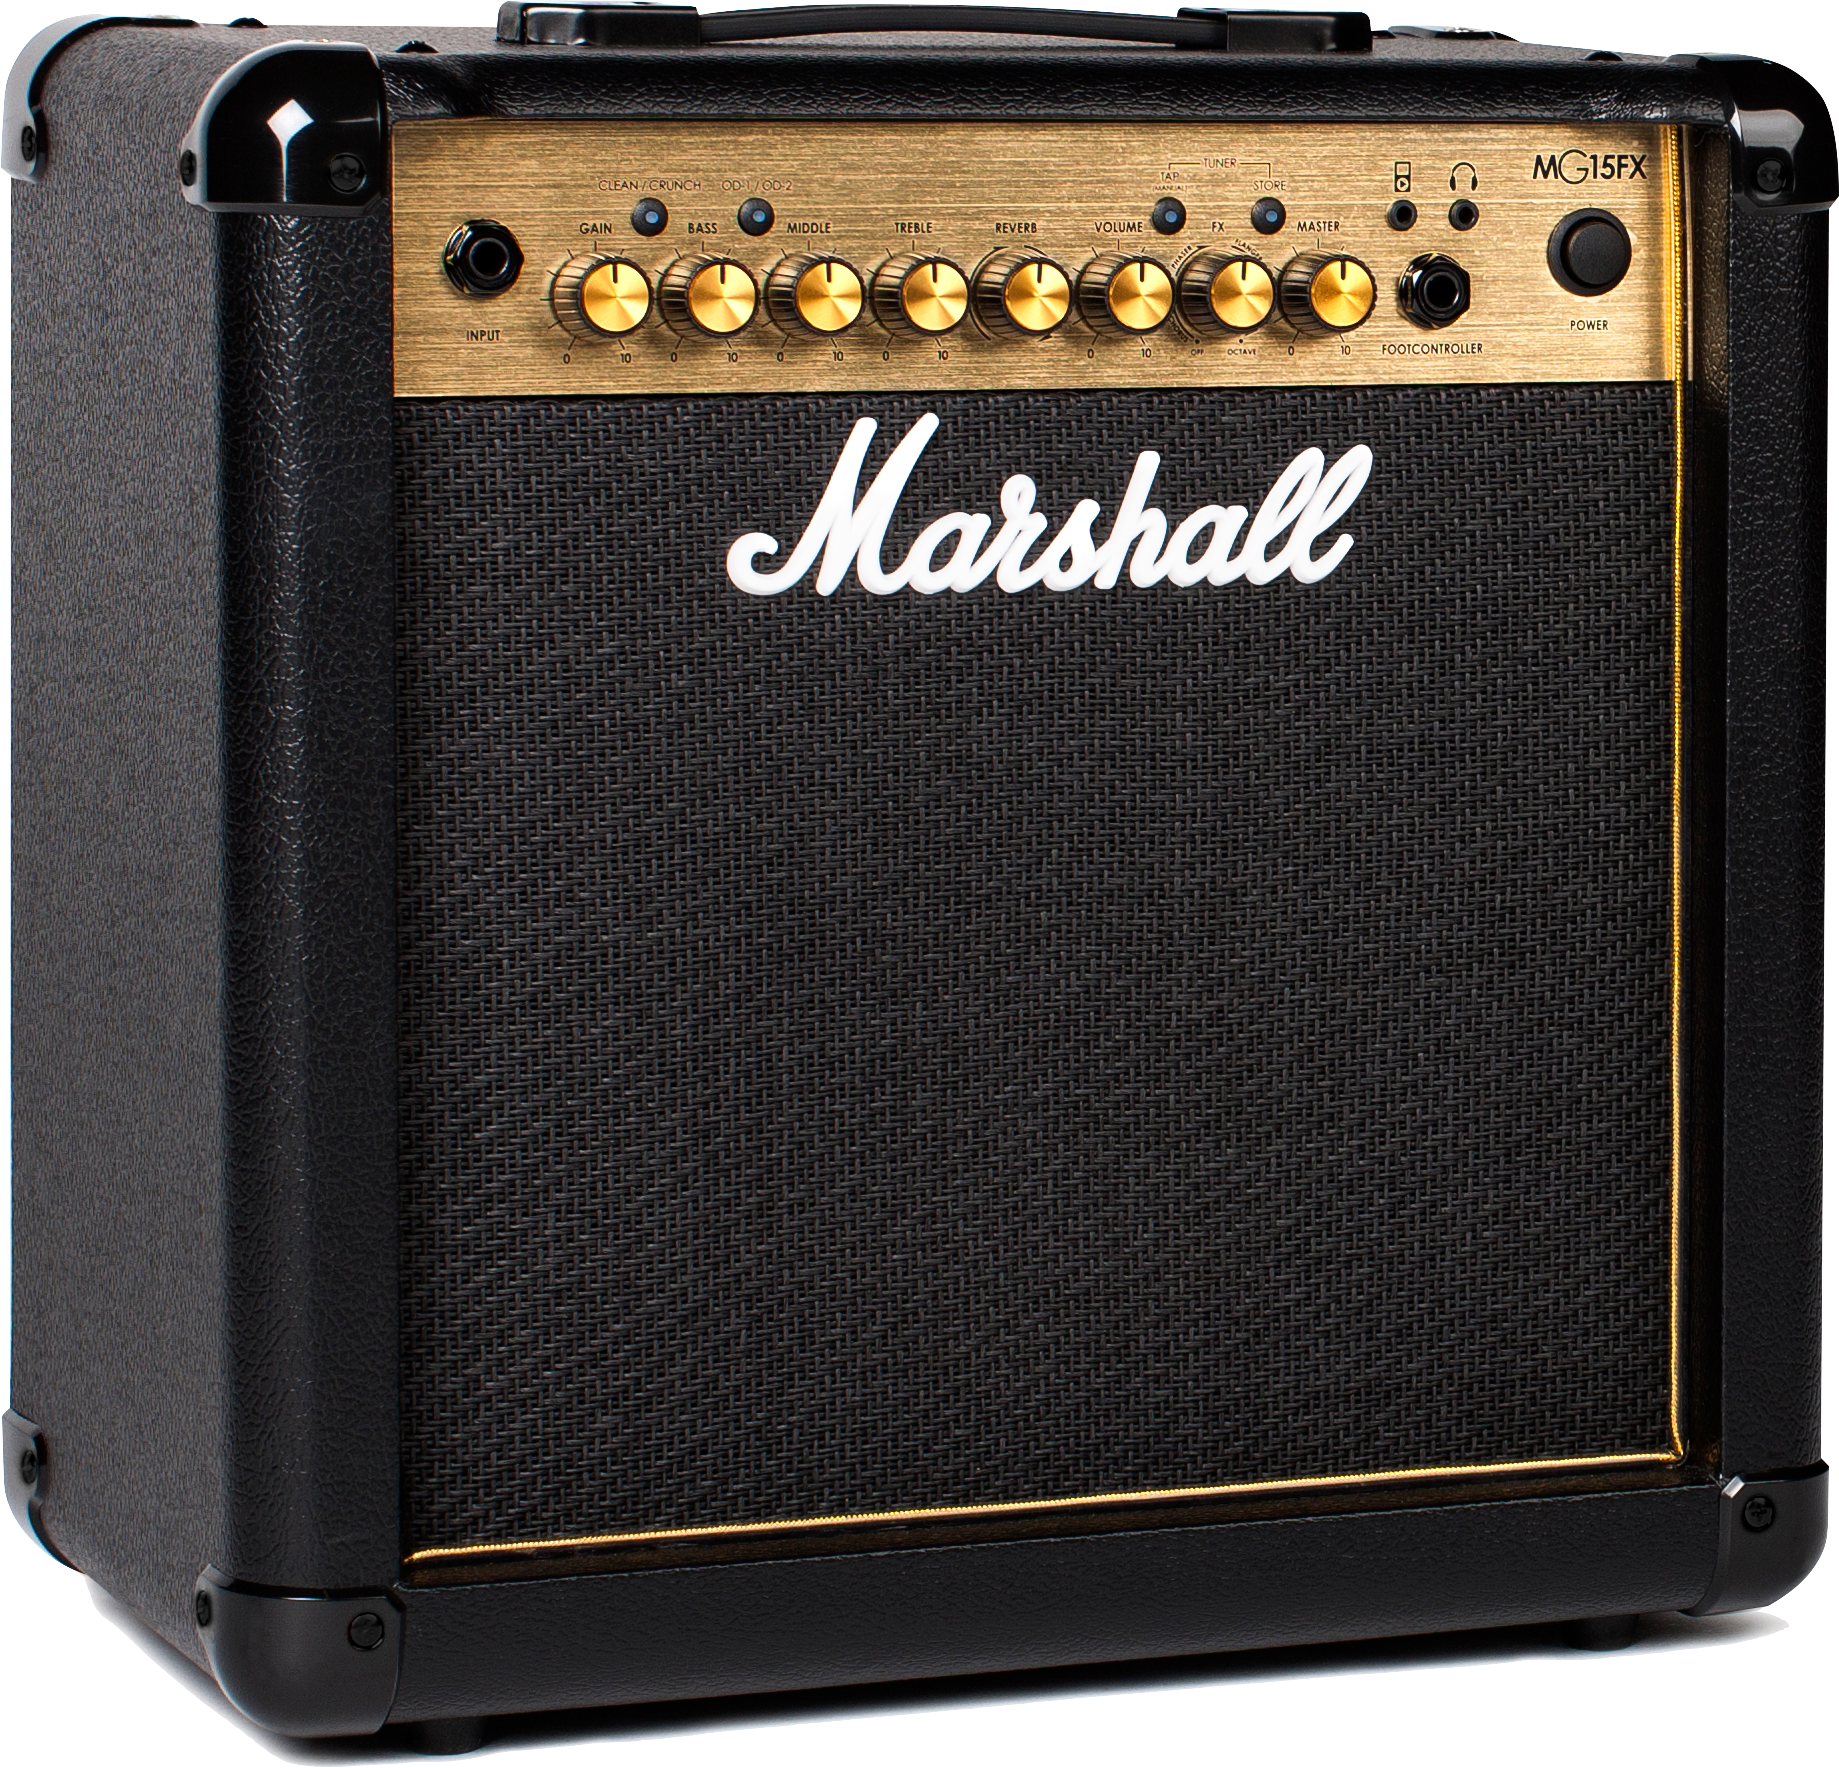 Marshall Mg15fx Mg Gold 15w 1x8 - Ampli Guitare Électrique Combo - Main picture